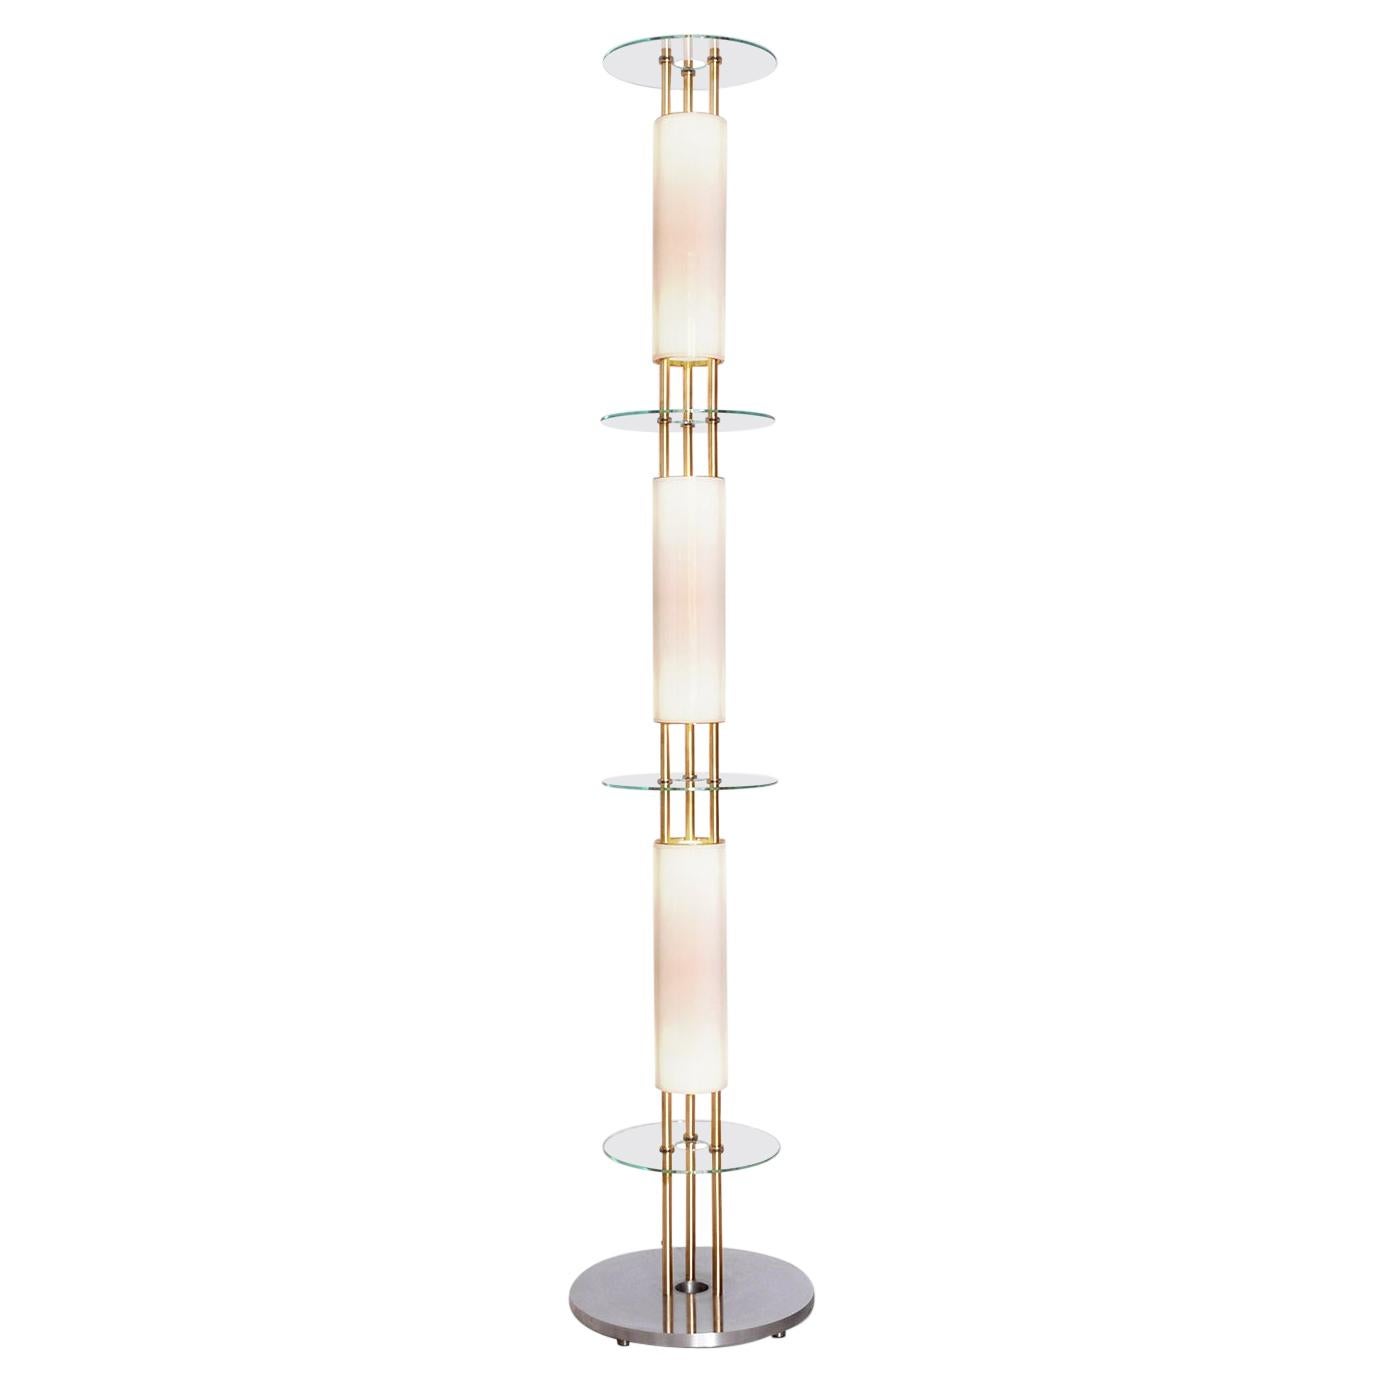 Modern Contemporary Customizable Sculptural Floor Lamp with Opal Glass Cylinders